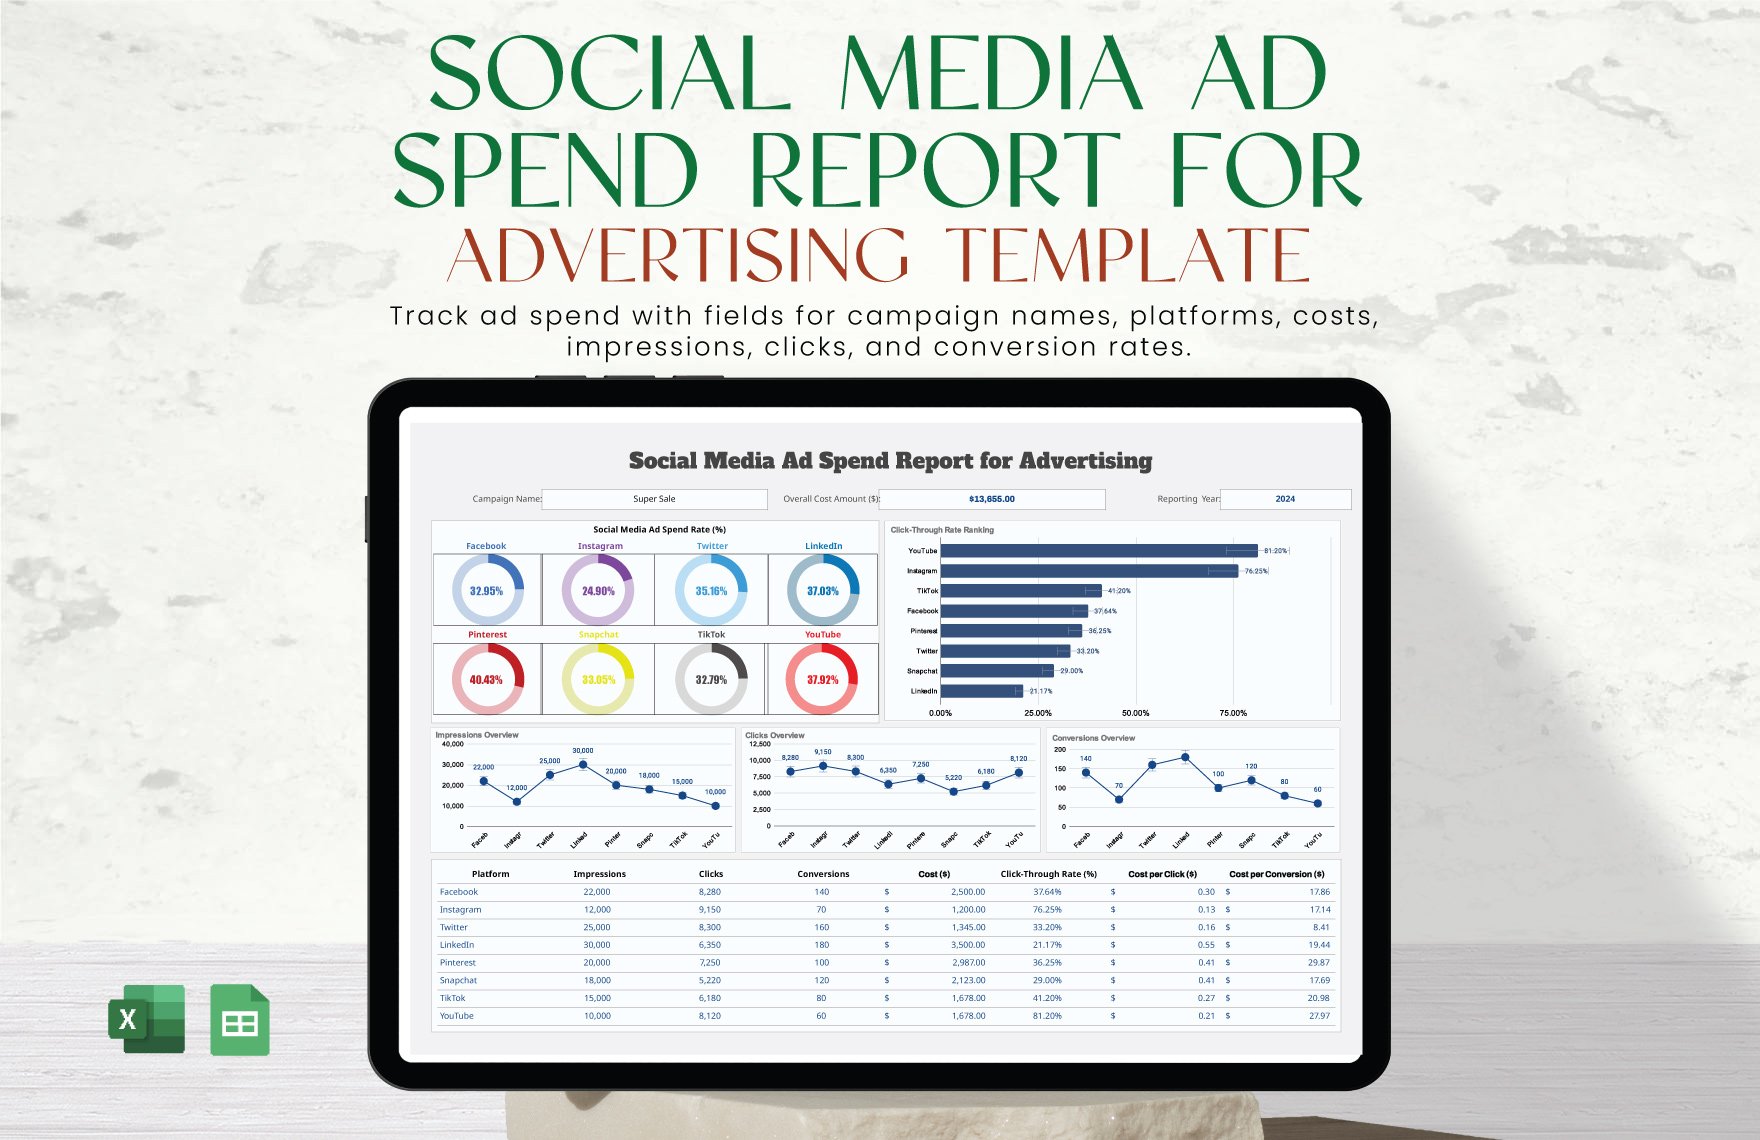 Social Media Ad Spend Report for Advertising Template in Excel, Google Sheets